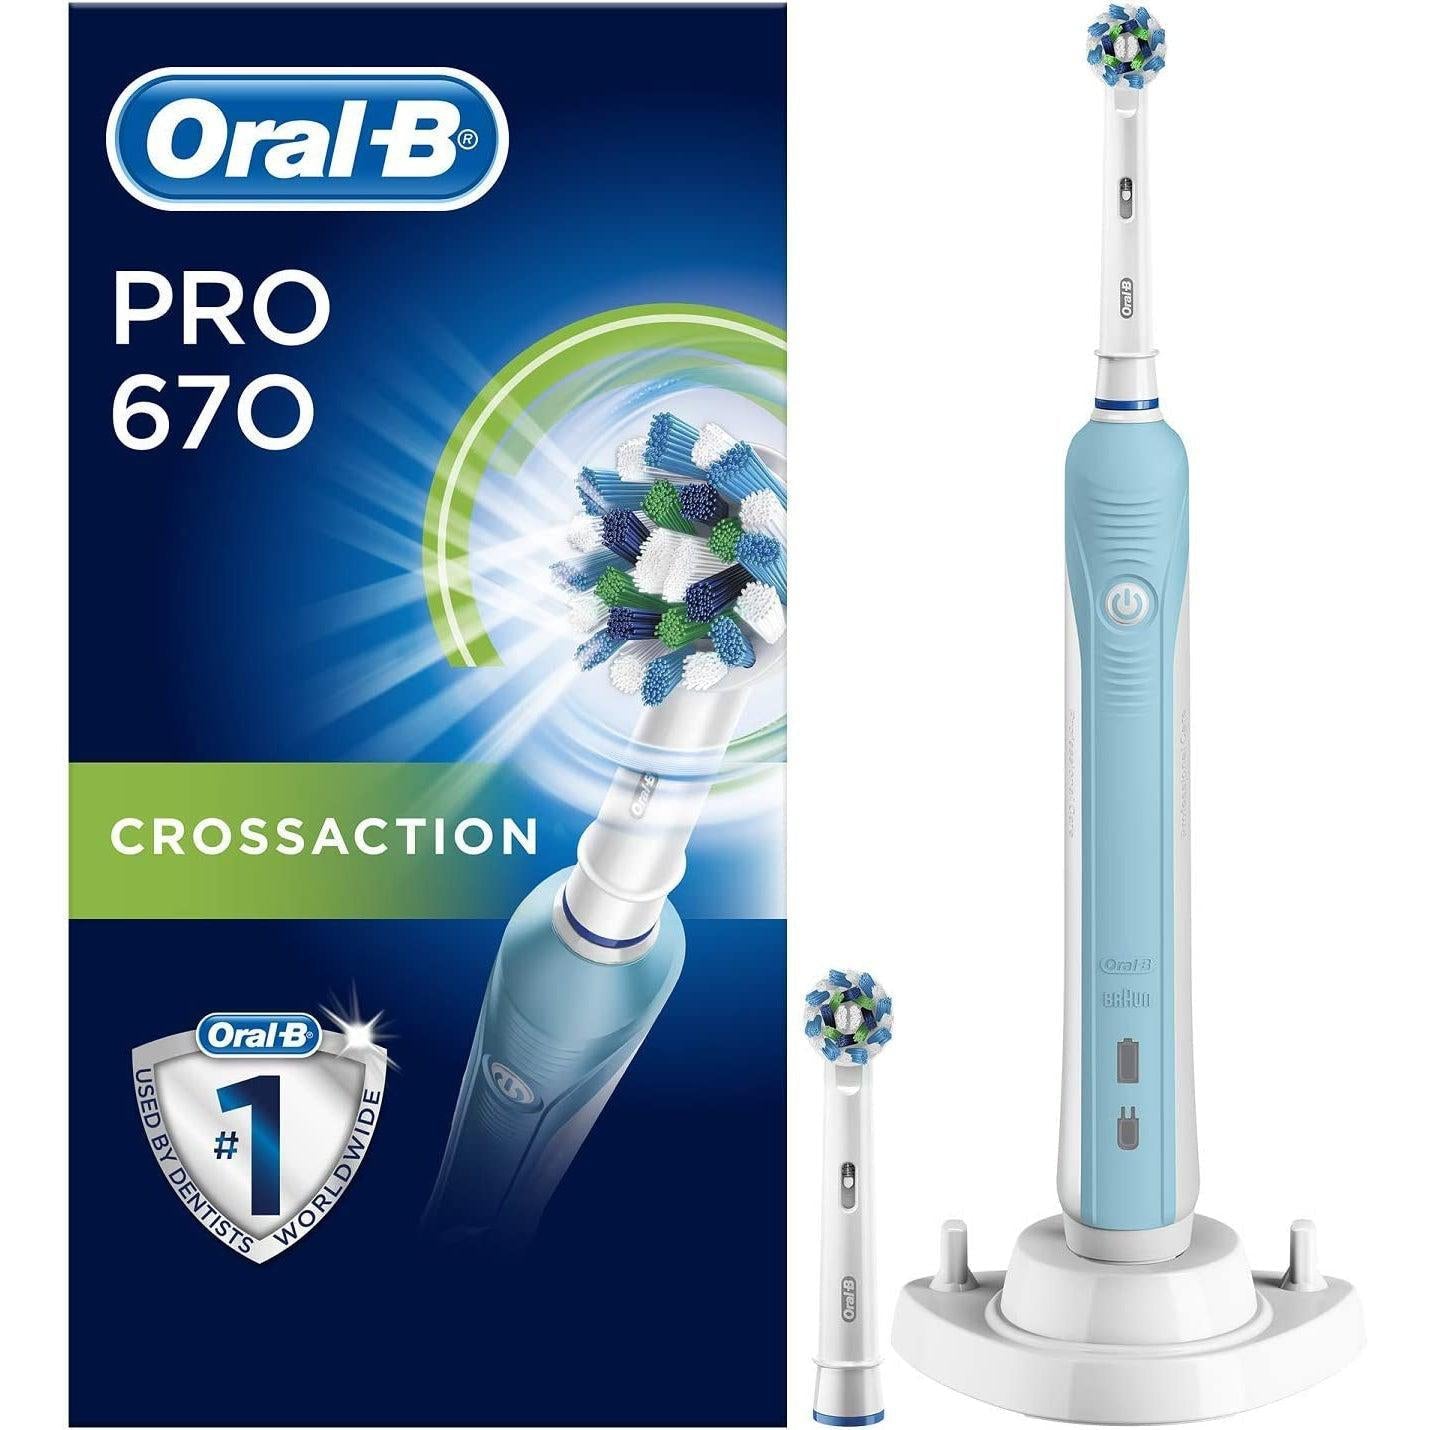 Oral-B Pro 670 Cross Action Electric Toothbrush with 2 replacement heads - Healthxpress.ie